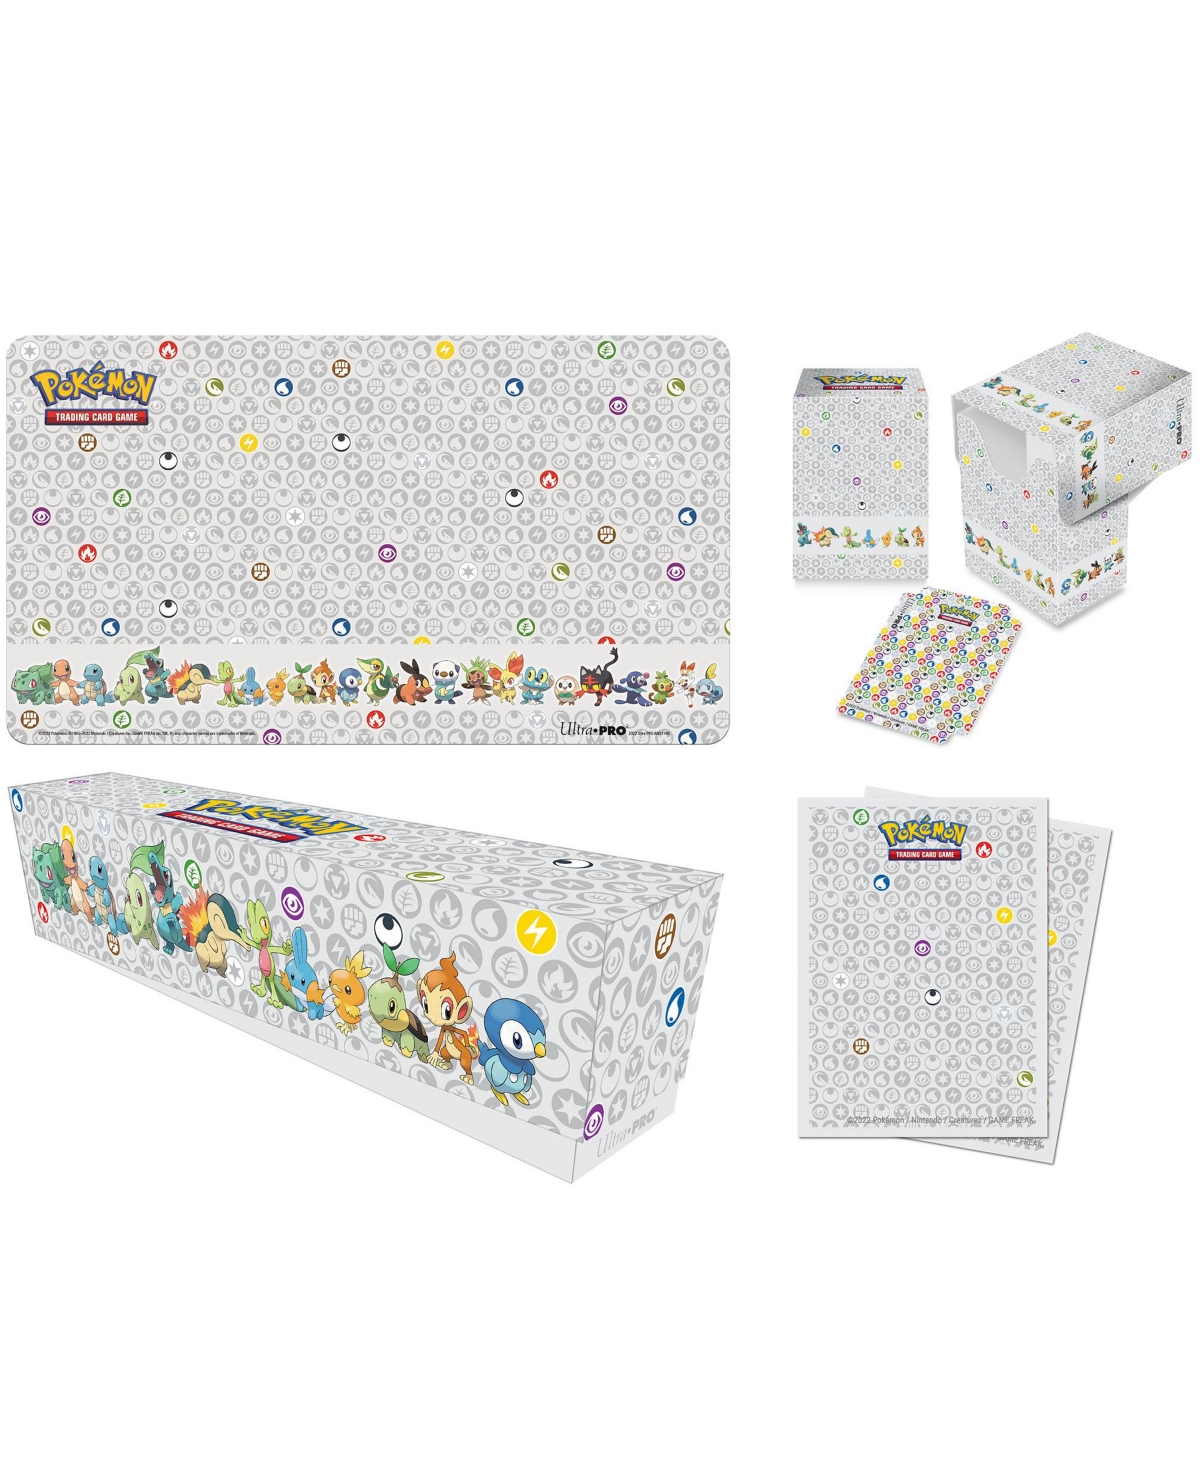 Ultra Pro Kids' Pokemon First Partner Accessory Bundle Includes Storage Box For 700 Plus Sleeved Cards Deck Box 65ct In Multi